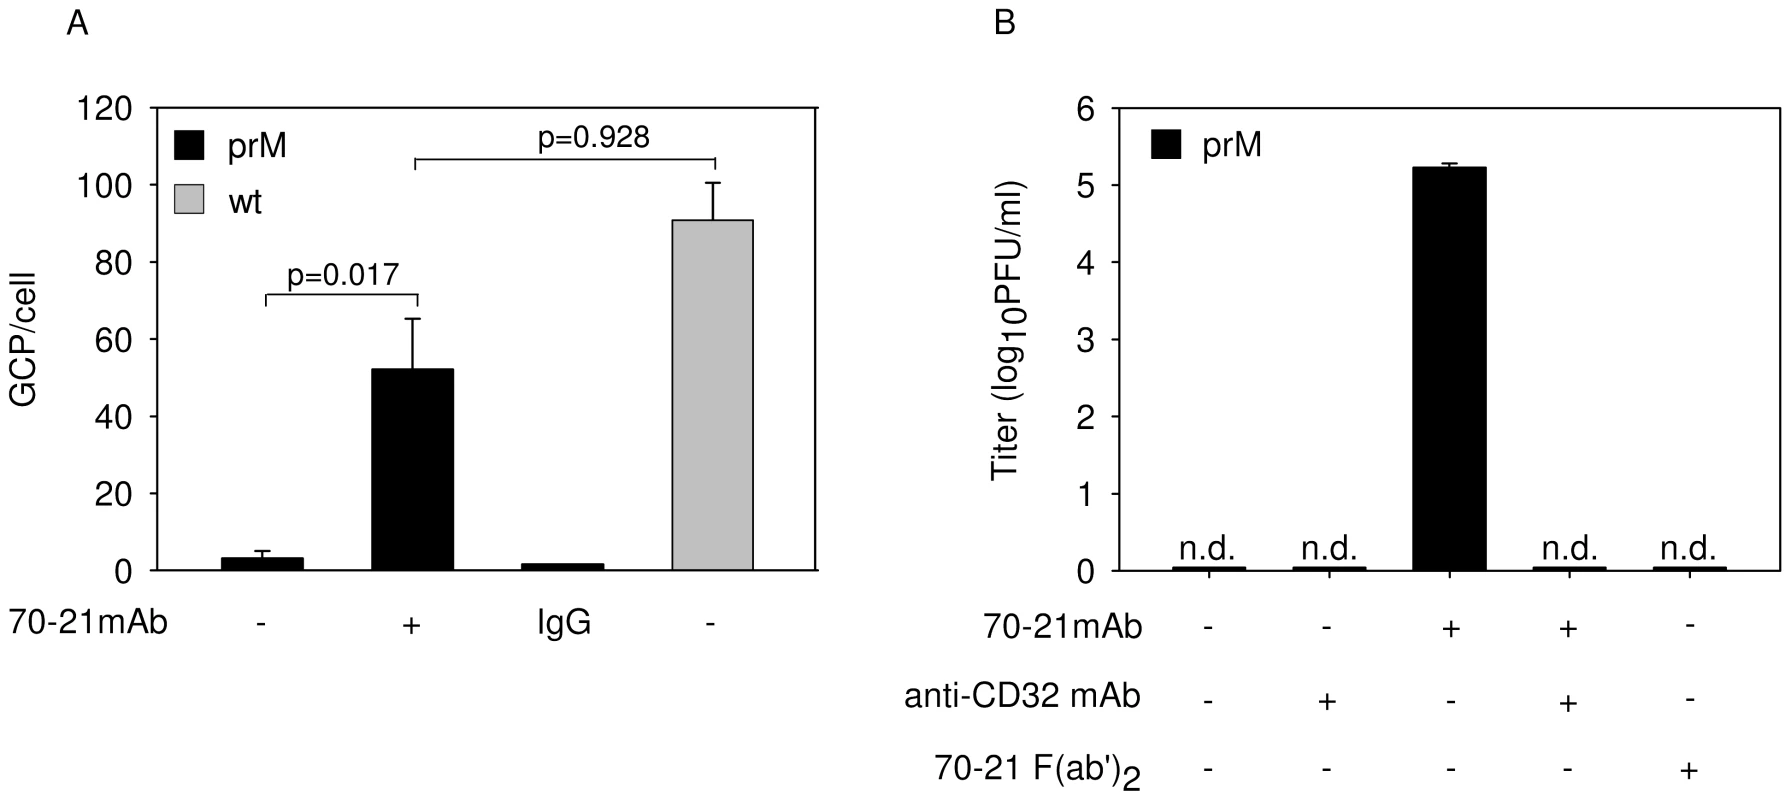 Anti-prM antibody stimulates binding of immature DENV particles to cells through interaction with FcγIIR.